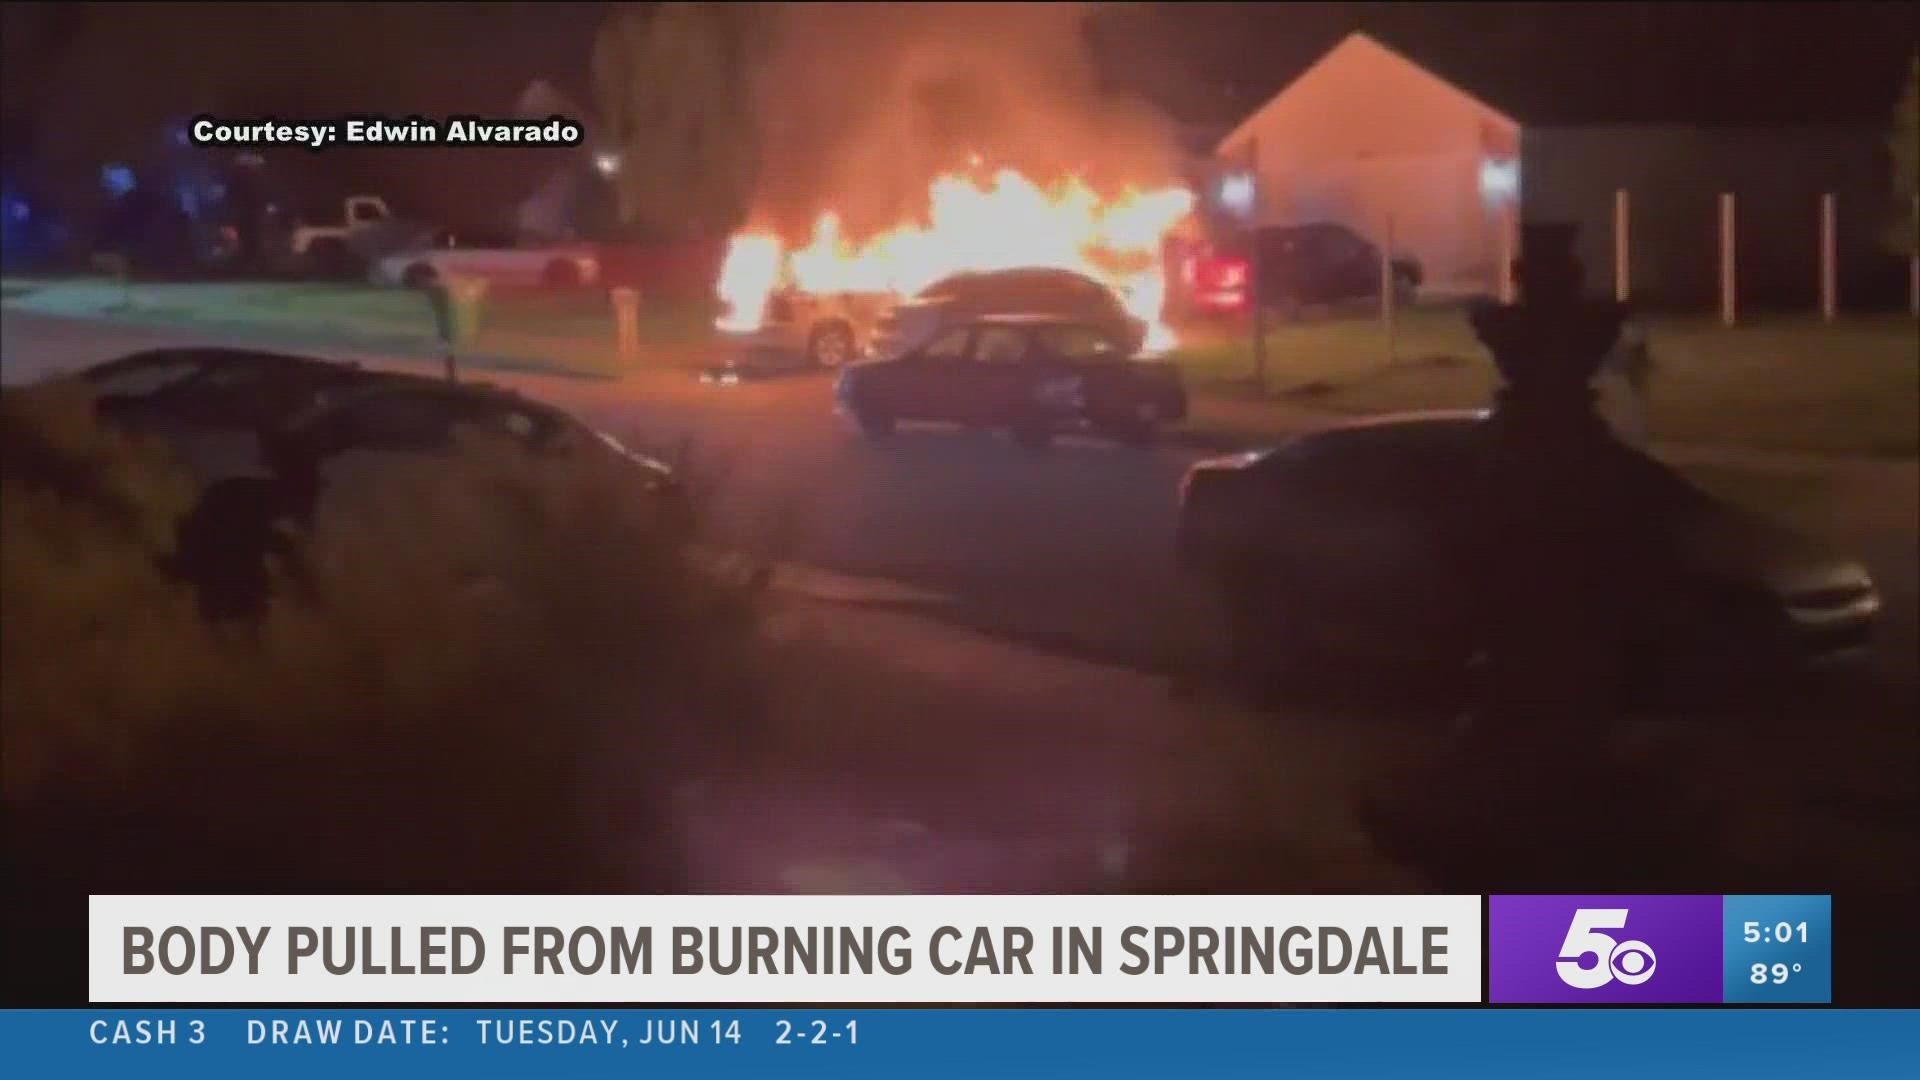 According to Captain Jeff Taylor with the Springdale Police Department, officers and firefighters responded to a vehicle fire at a home on Collins Ave. around 4 a.m.